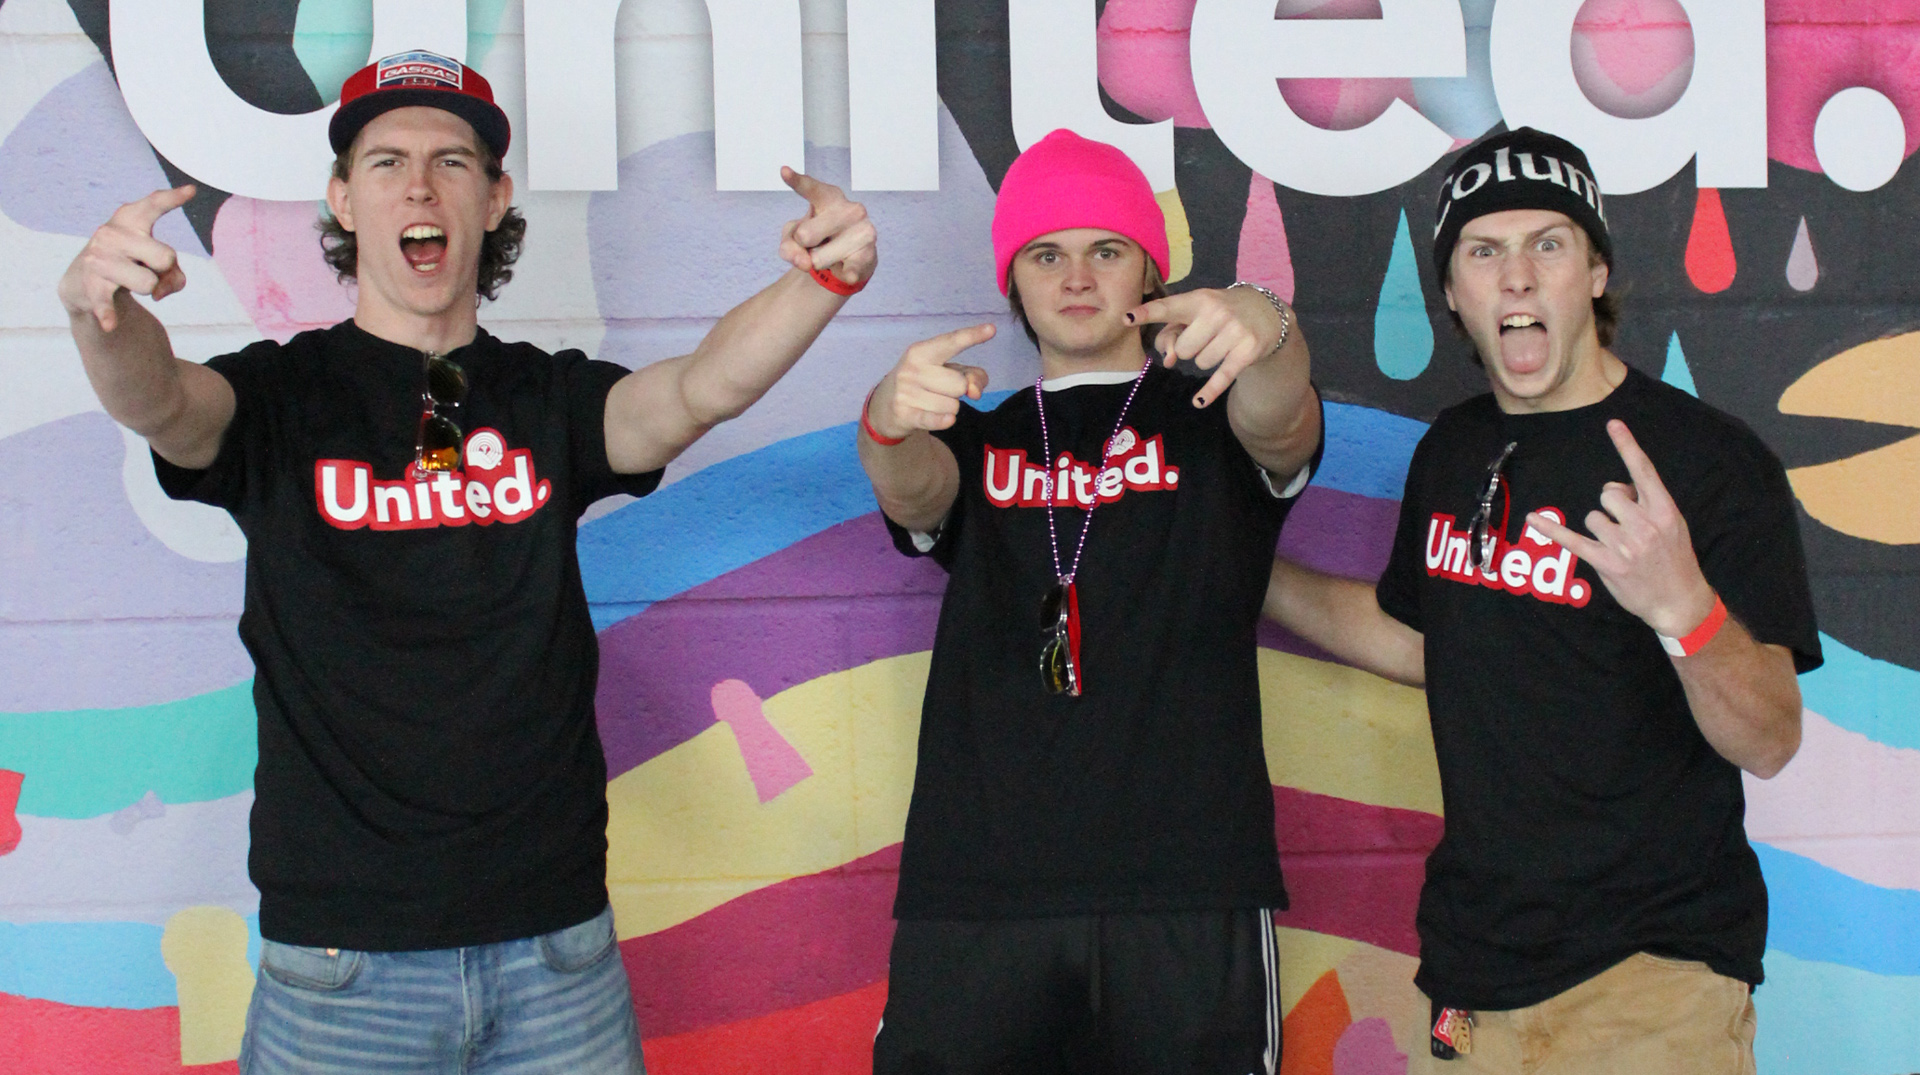 Left to right: Max, vocalist and lead guitarist is wearing red ballcap, jeans; Kaelin, drummer is blonde with a pink toque and Adidas pants; Evan, basist is wearing a Columbia toque and khaki pants.